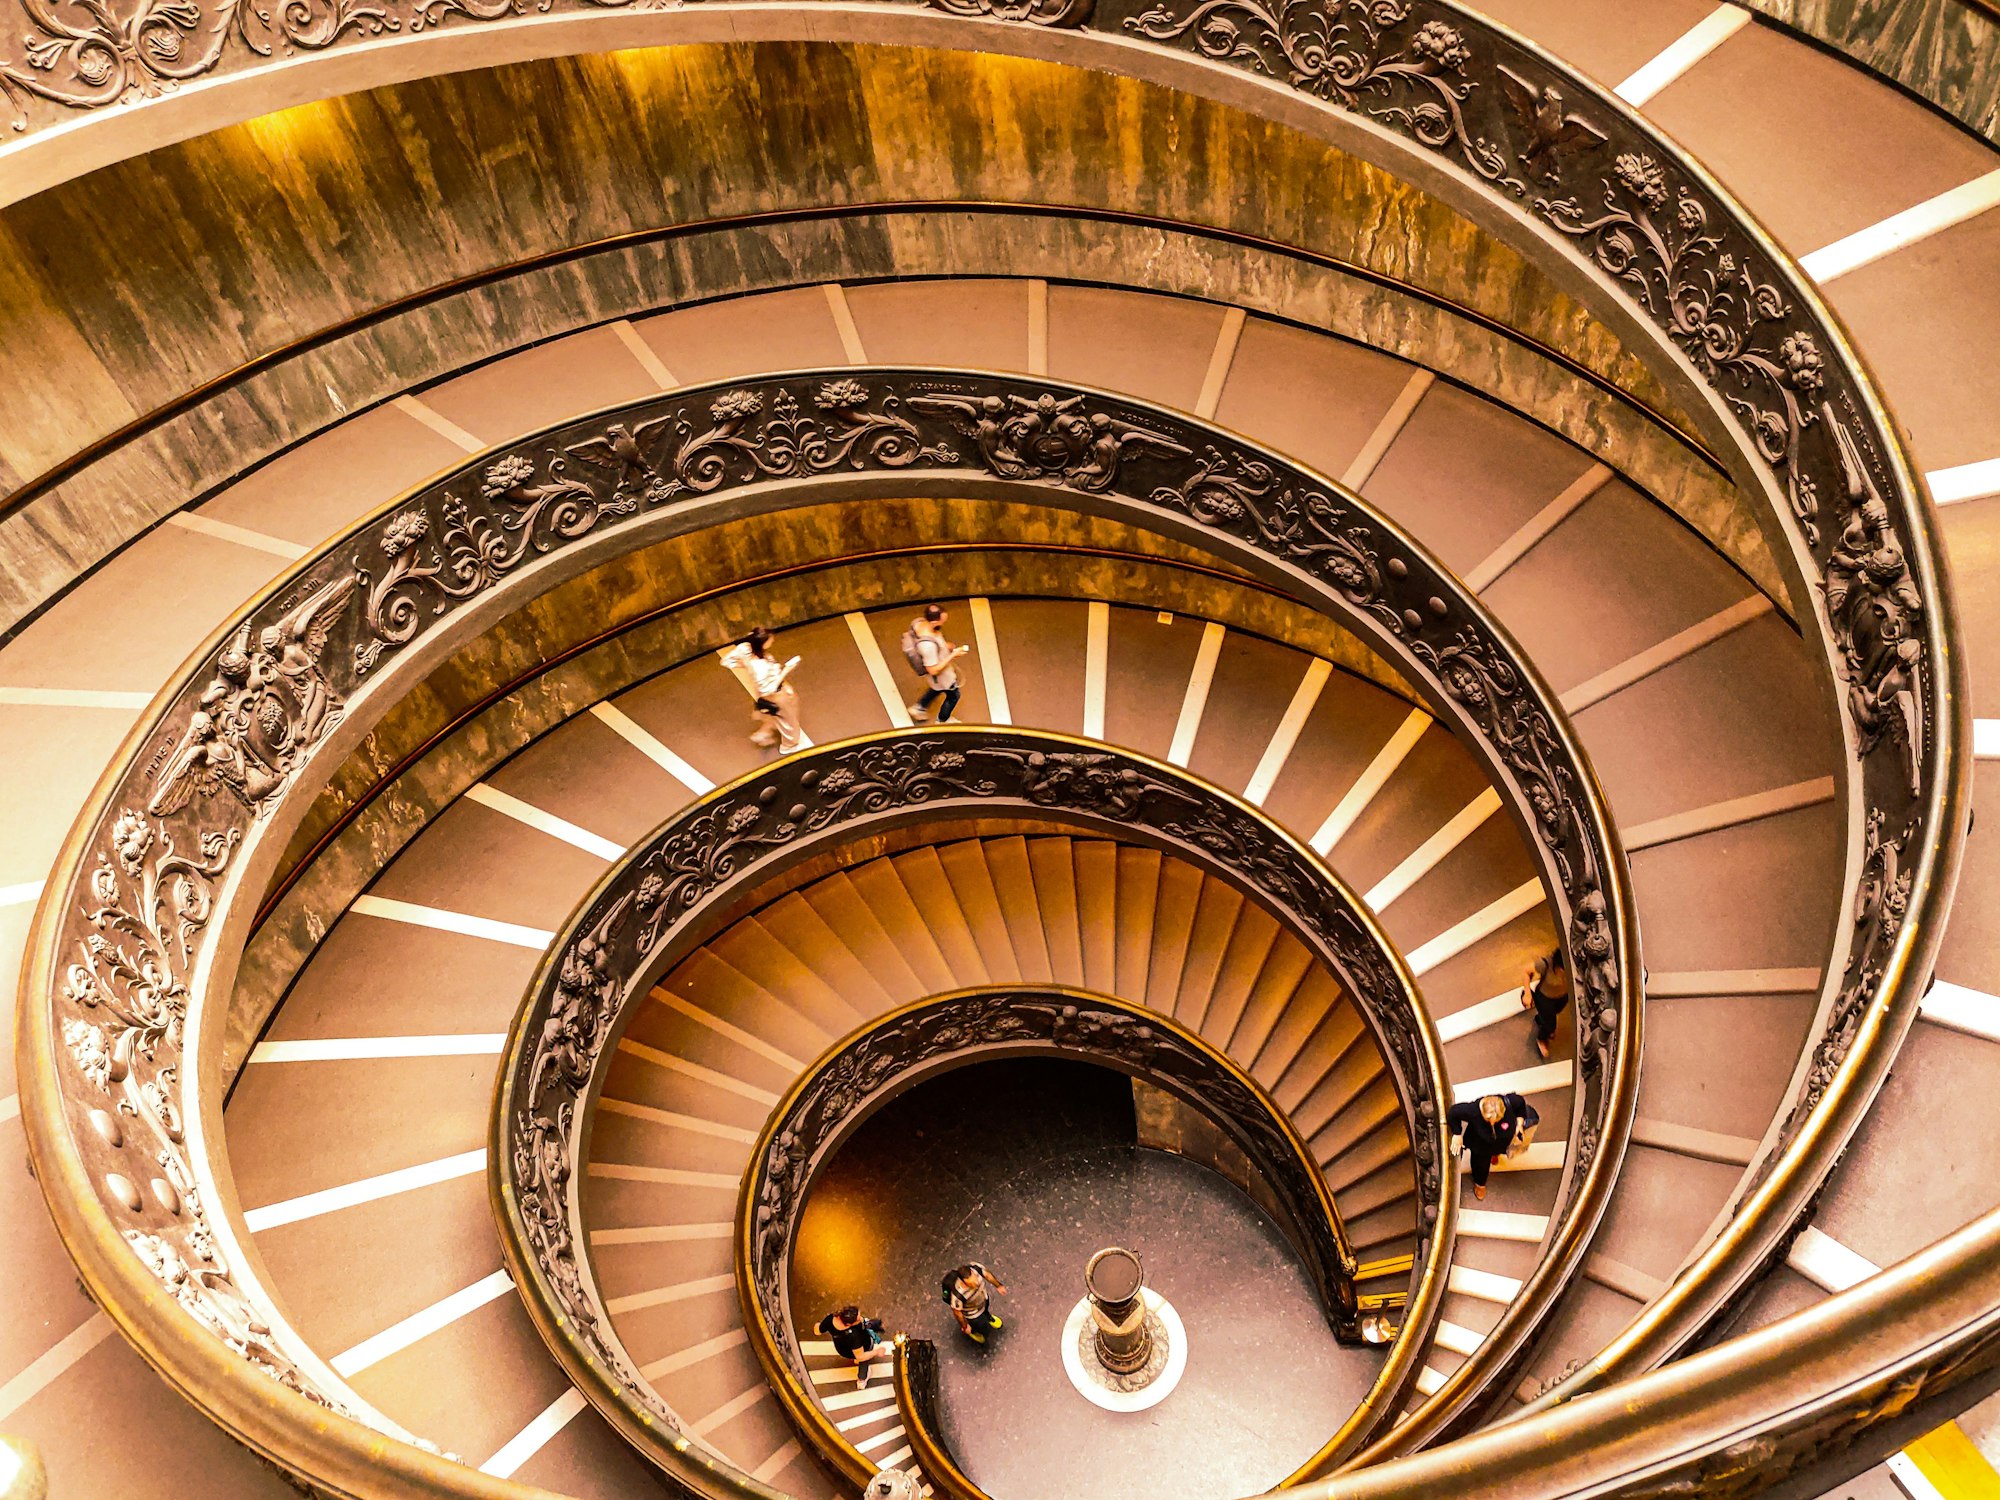 The world needs more spiral staircases